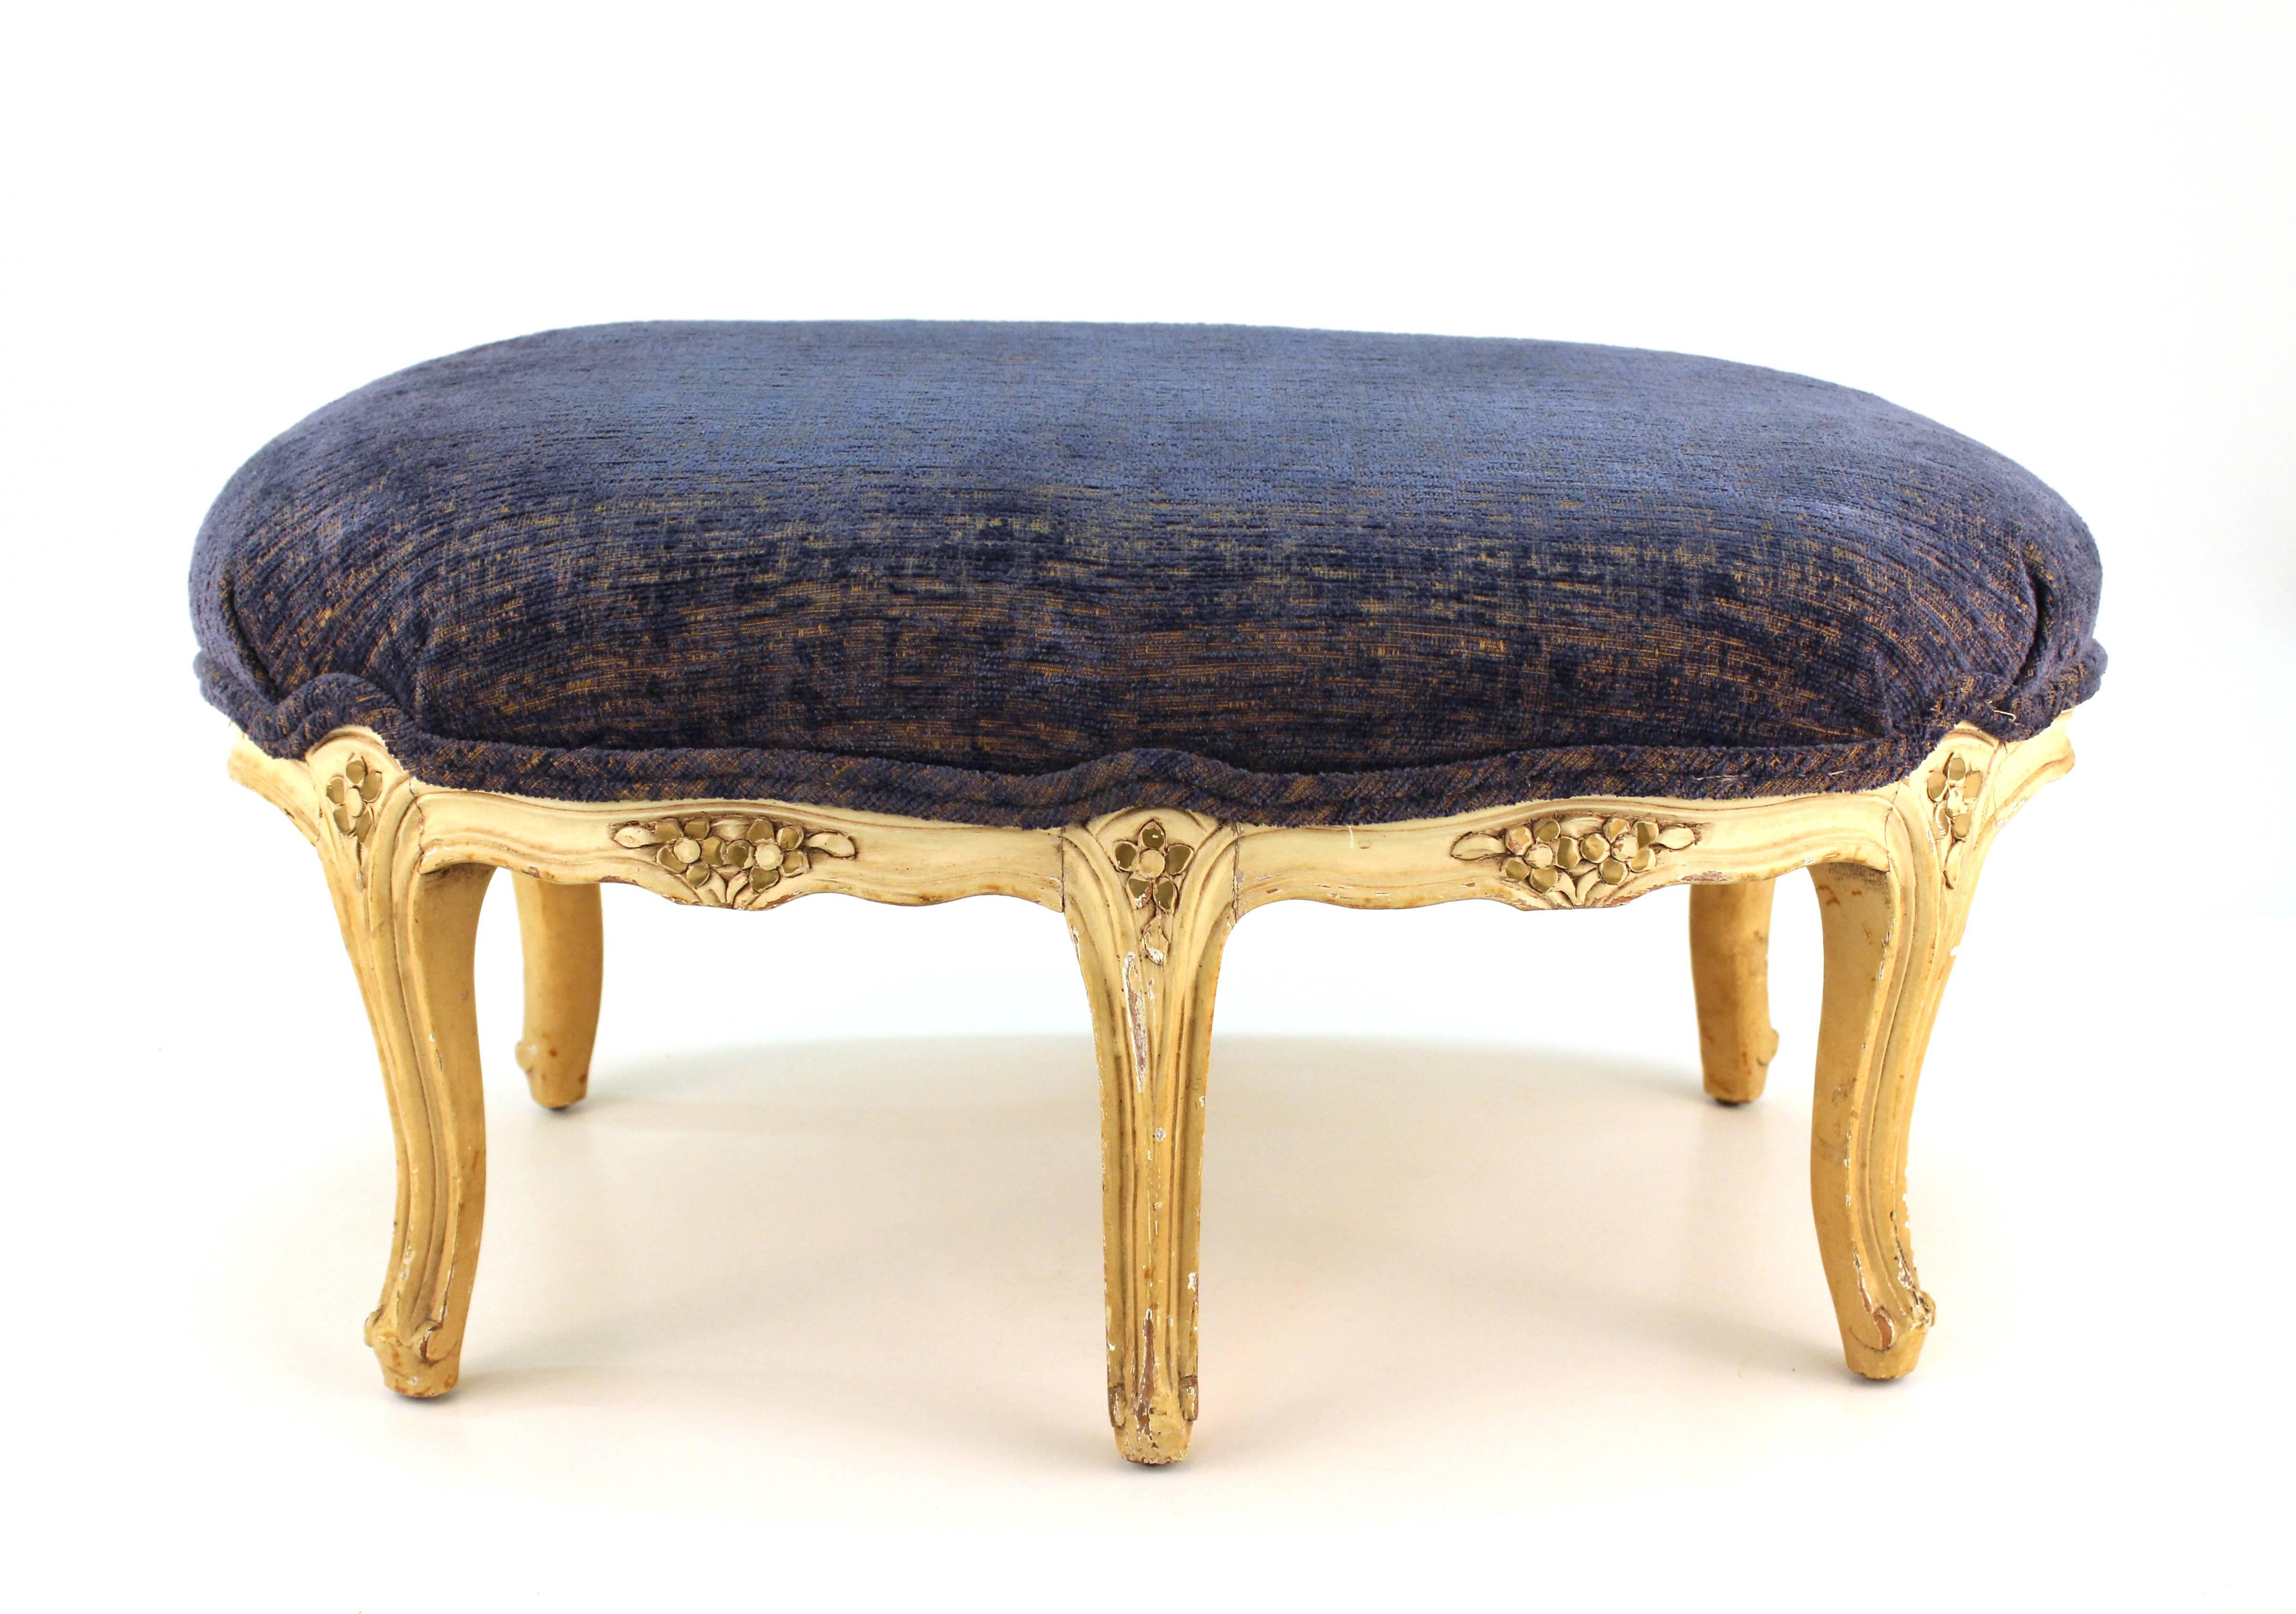 A long oval footrest on six legs. Crafted in pale wood with etched detail and floral motif. Covered in soft blue upholstery. The item is in good condition.